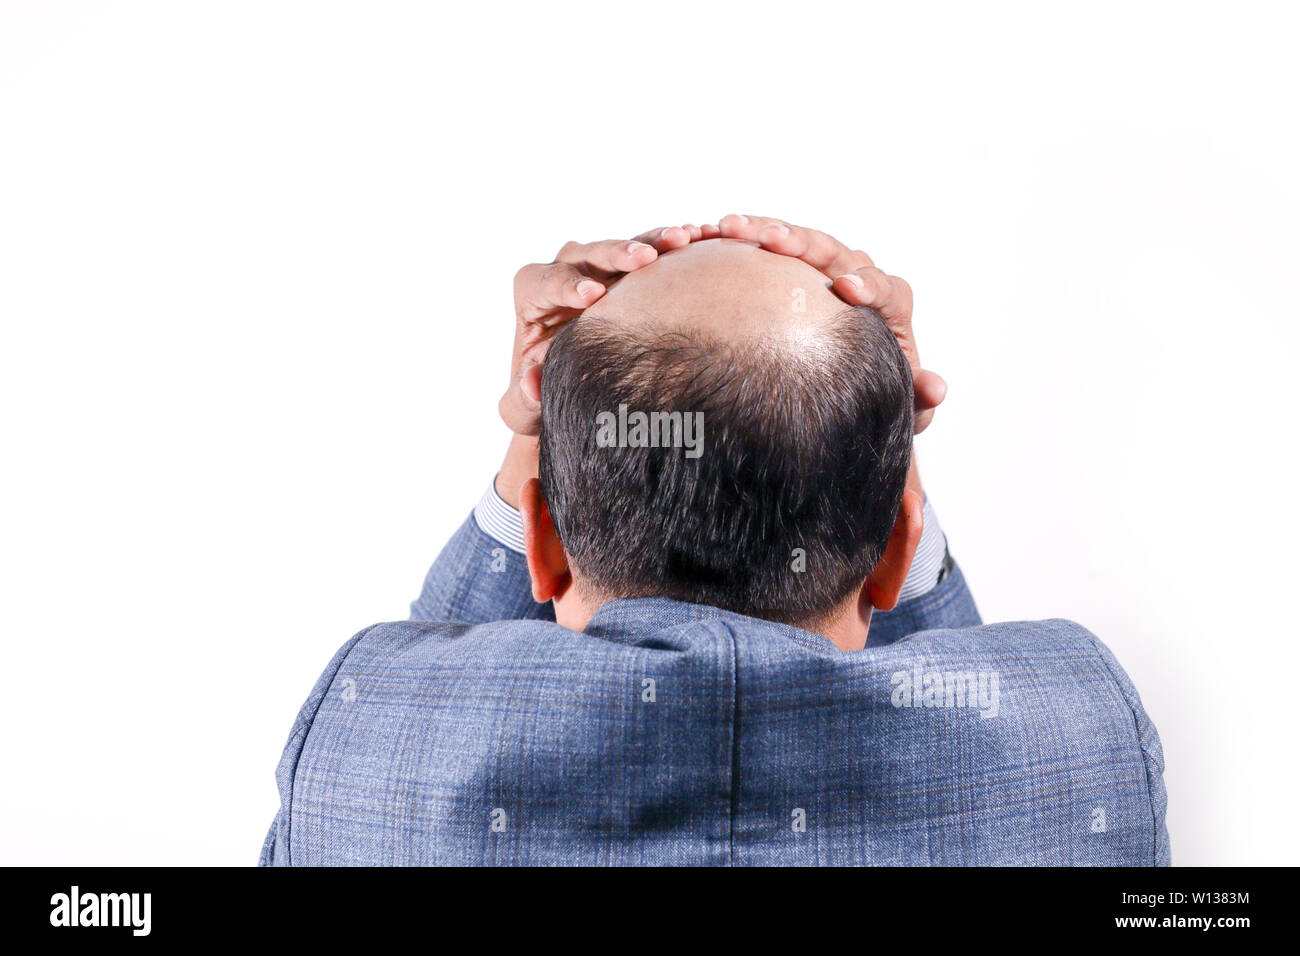 bald businessman with his head on scalp view from behind with white background Stock Photo